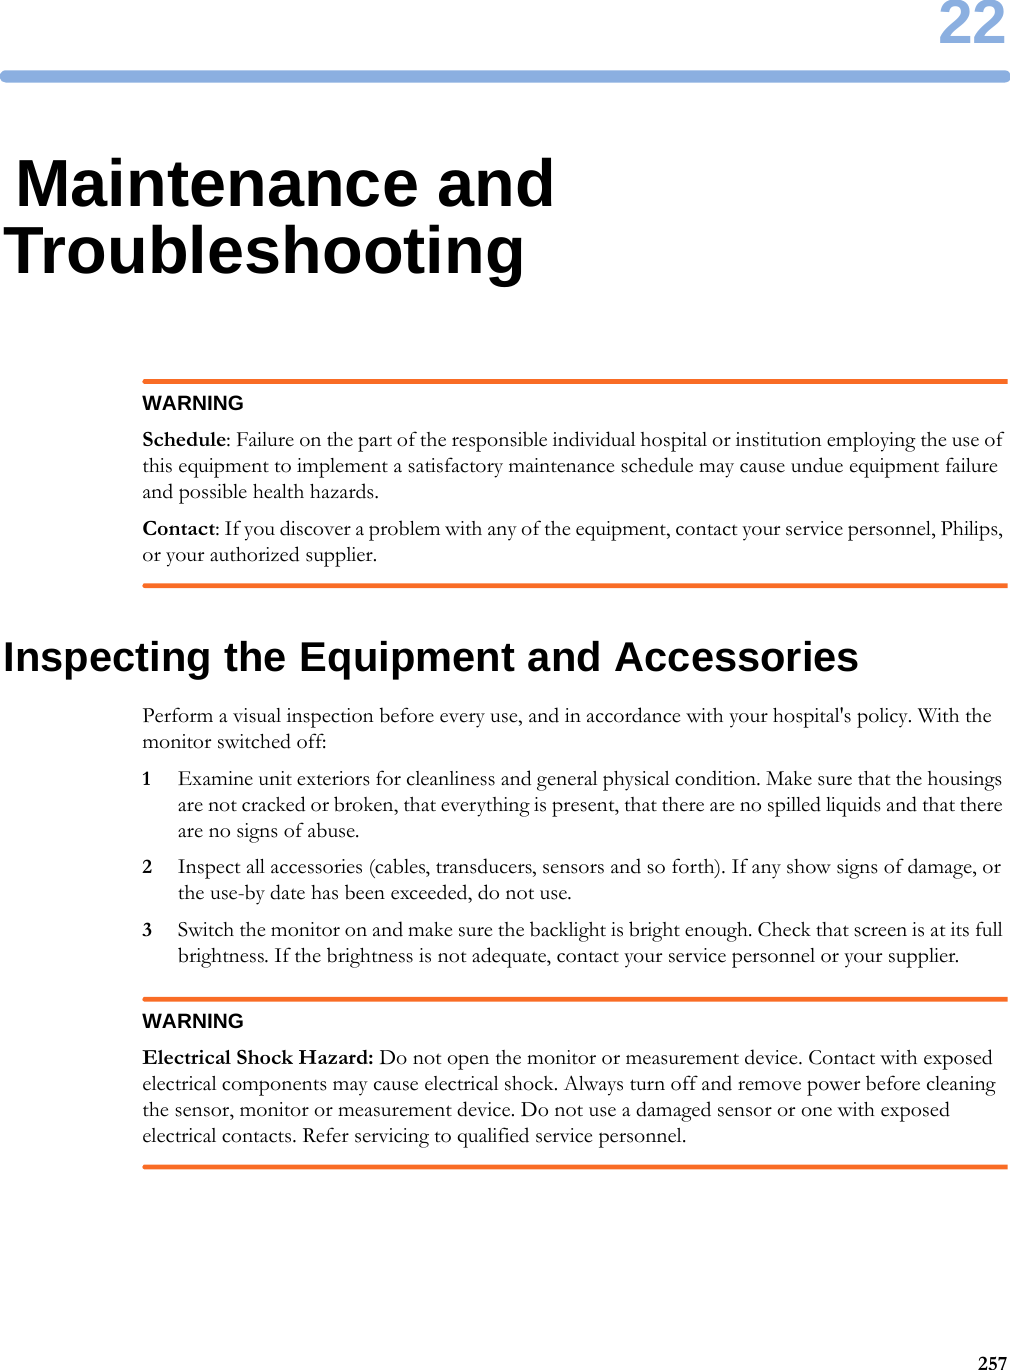 2225722Maintenance and TroubleshootingWARNINGSchedule: Failure on the part of the responsible individual hospital or institution employing the use of this equipment to implement a satisfactory maintenance schedule may cause undue equipment failure and possible health hazards.Contact: If you discover a problem with any of the equipment, contact your service personnel, Philips, or your authorized supplier.Inspecting the Equipment and AccessoriesPerform a visual inspection before every use, and in accordance with your hospital&apos;s policy. With the monitor switched off:1Examine unit exteriors for cleanliness and general physical condition. Make sure that the housings are not cracked or broken, that everything is present, that there are no spilled liquids and that there are no signs of abuse.2Inspect all accessories (cables, transducers, sensors and so forth). If any show signs of damage, or the use-by date has been exceeded, do not use.3Switch the monitor on and make sure the backlight is bright enough. Check that screen is at its full brightness. If the brightness is not adequate, contact your service personnel or your supplier.WARNINGElectrical Shock Hazard: Do not open the monitor or measurement device. Contact with exposed electrical components may cause electrical shock. Always turn off and remove power before cleaning the sensor, monitor or measurement device. Do not use a damaged sensor or one with exposed electrical contacts. Refer servicing to qualified service personnel.